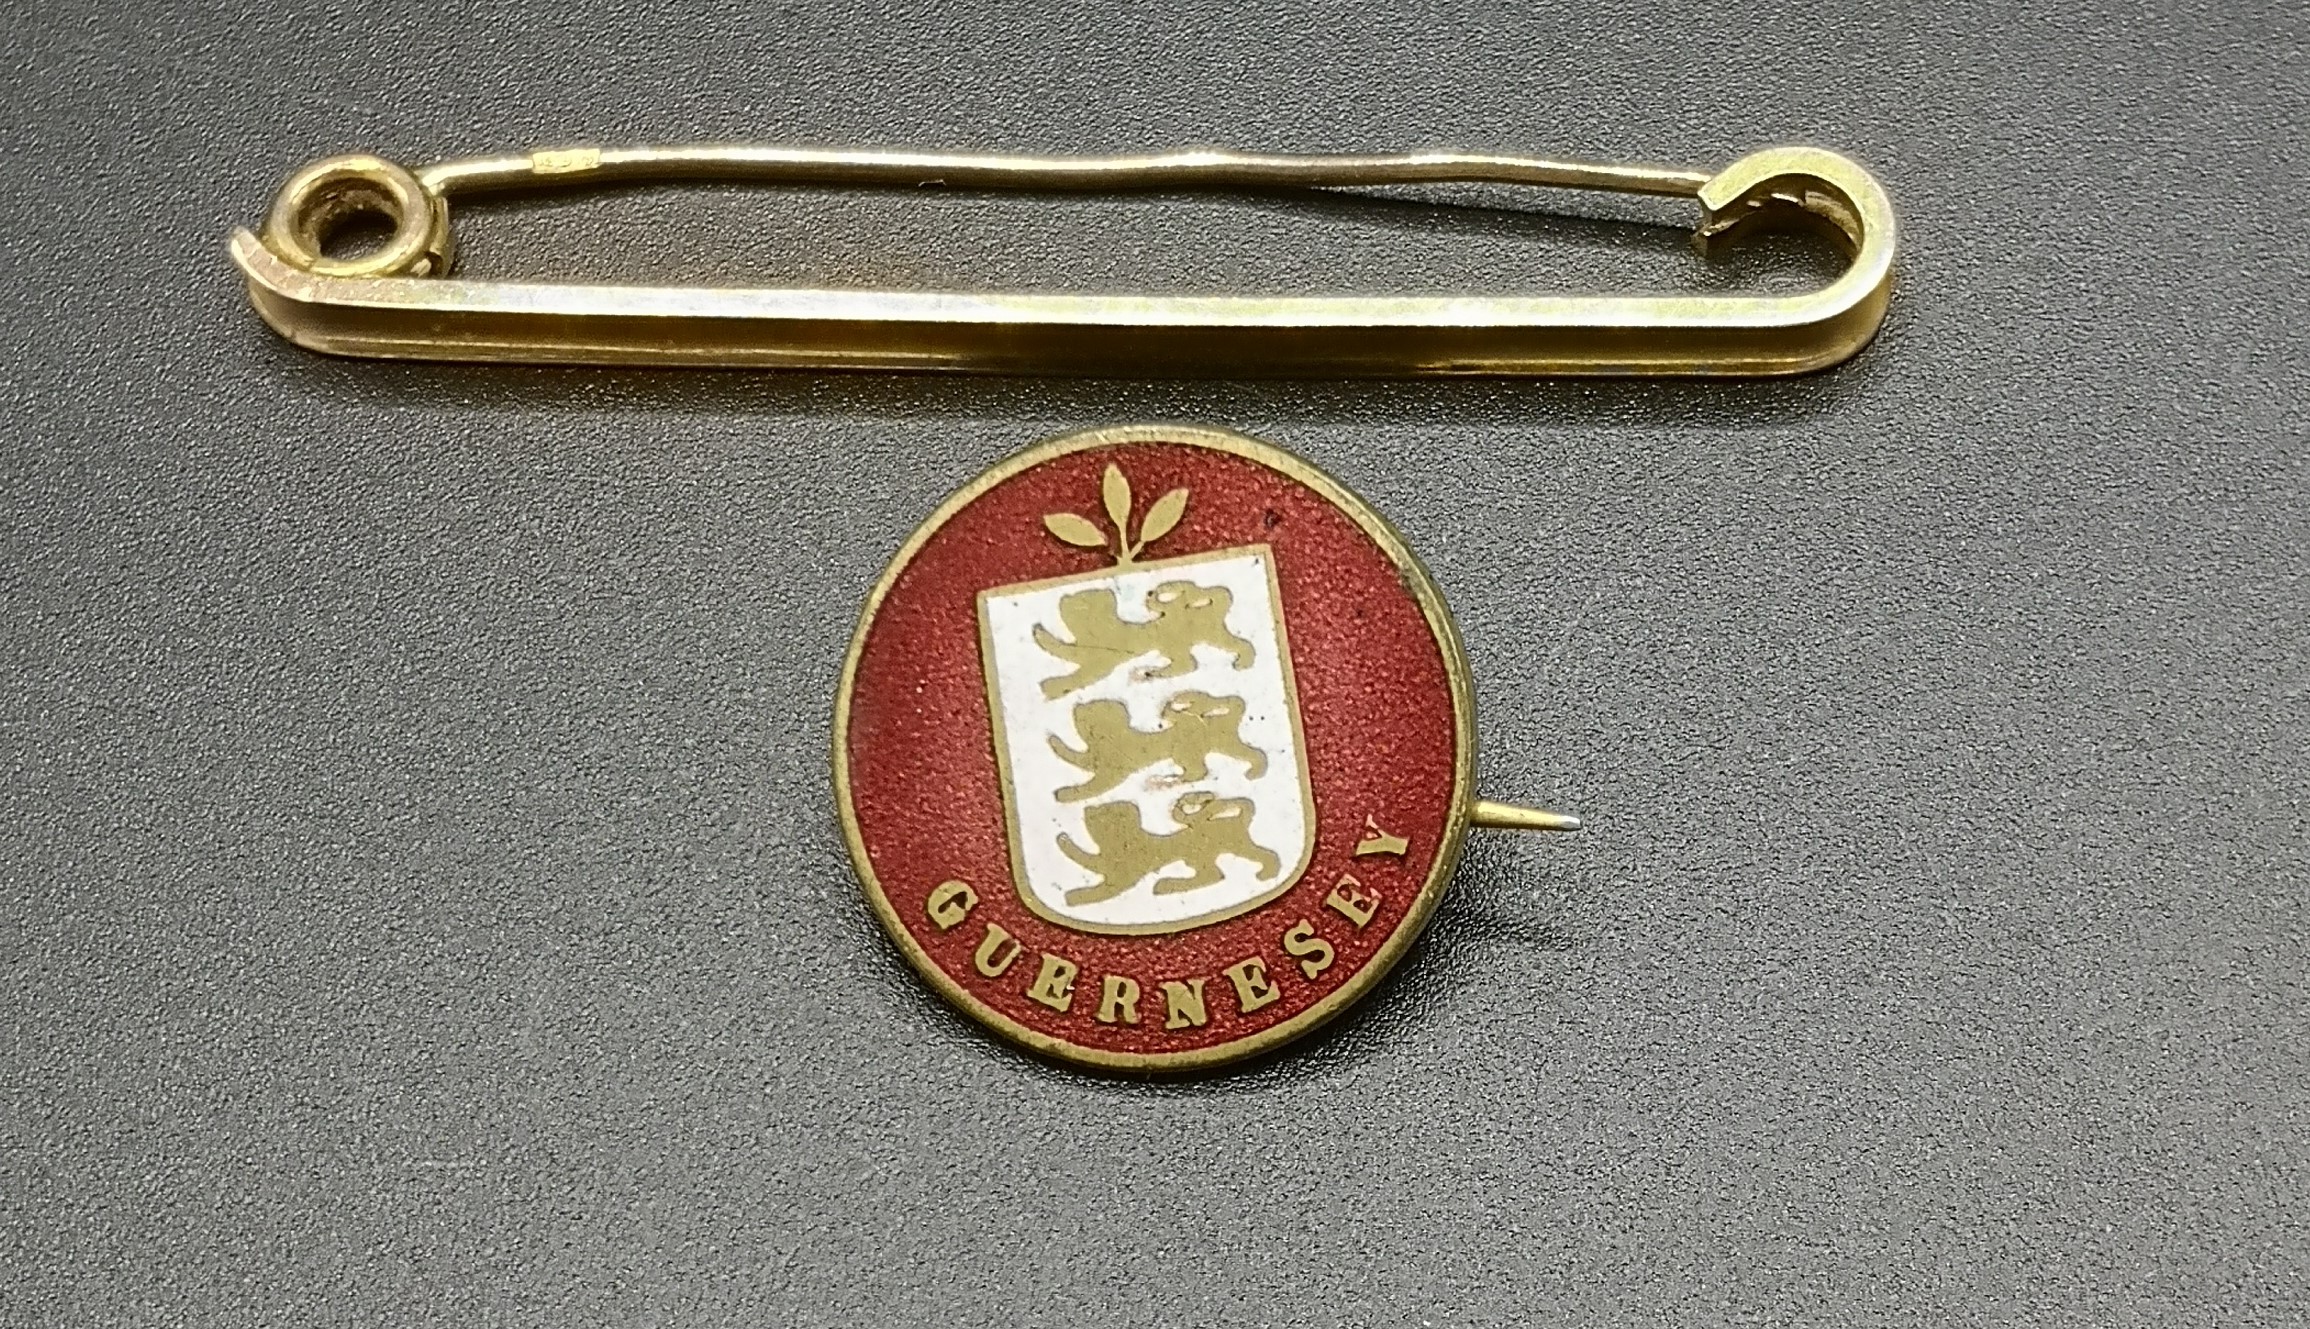 9ct gold tie pin and 1877 Guernsey coin/badge